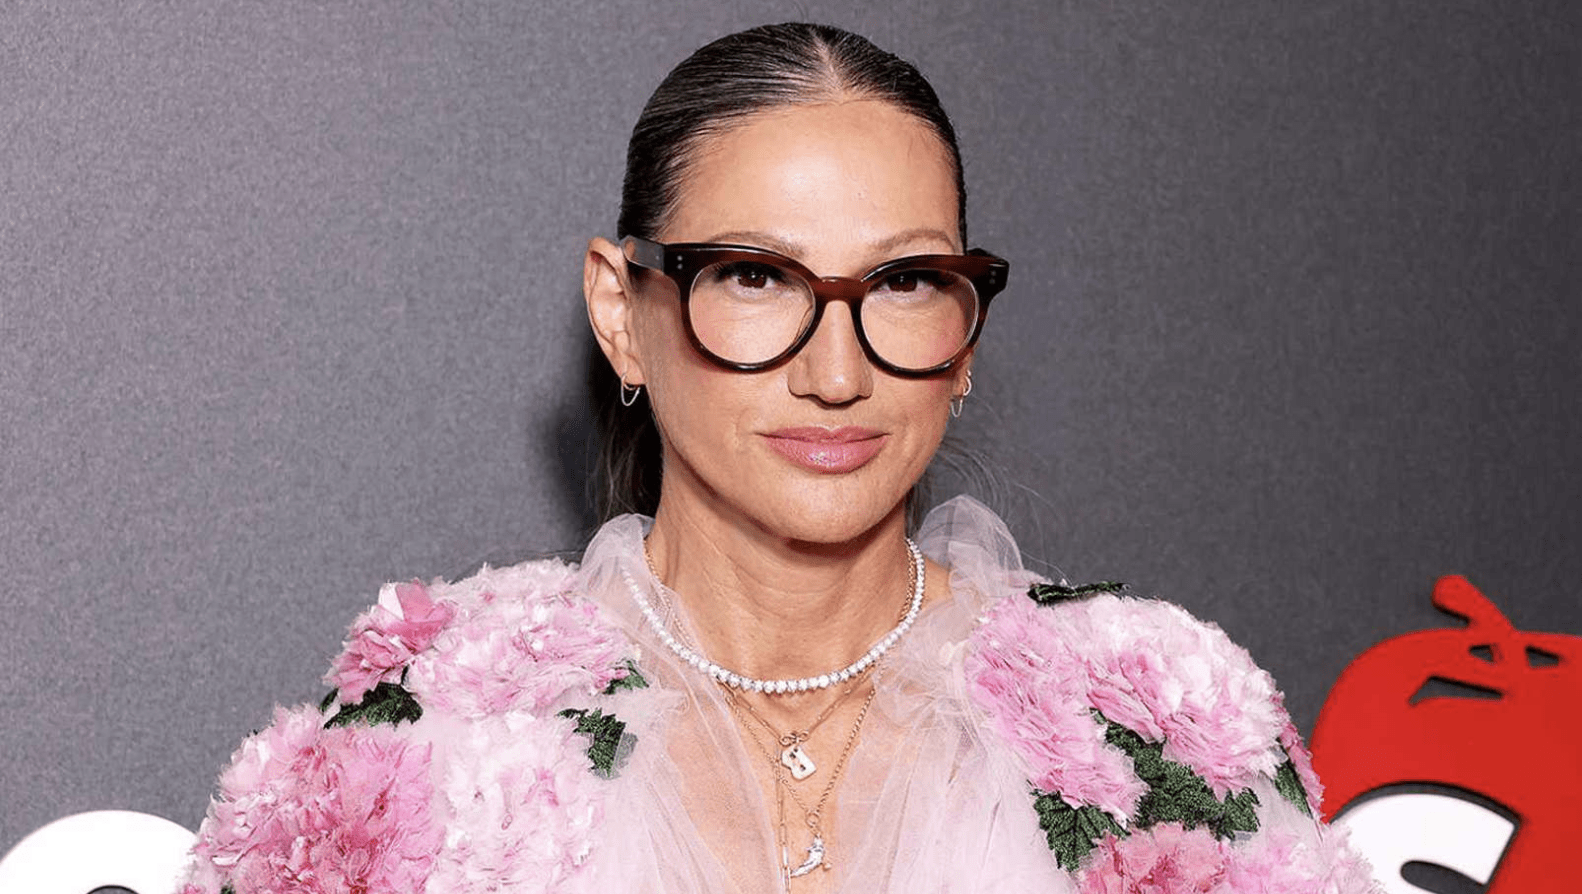 ‘RHONY’ Star Jenna Lyons Claims Outrage Over Being Outed As A Lesbian ‘It Was a Shocking Moment’